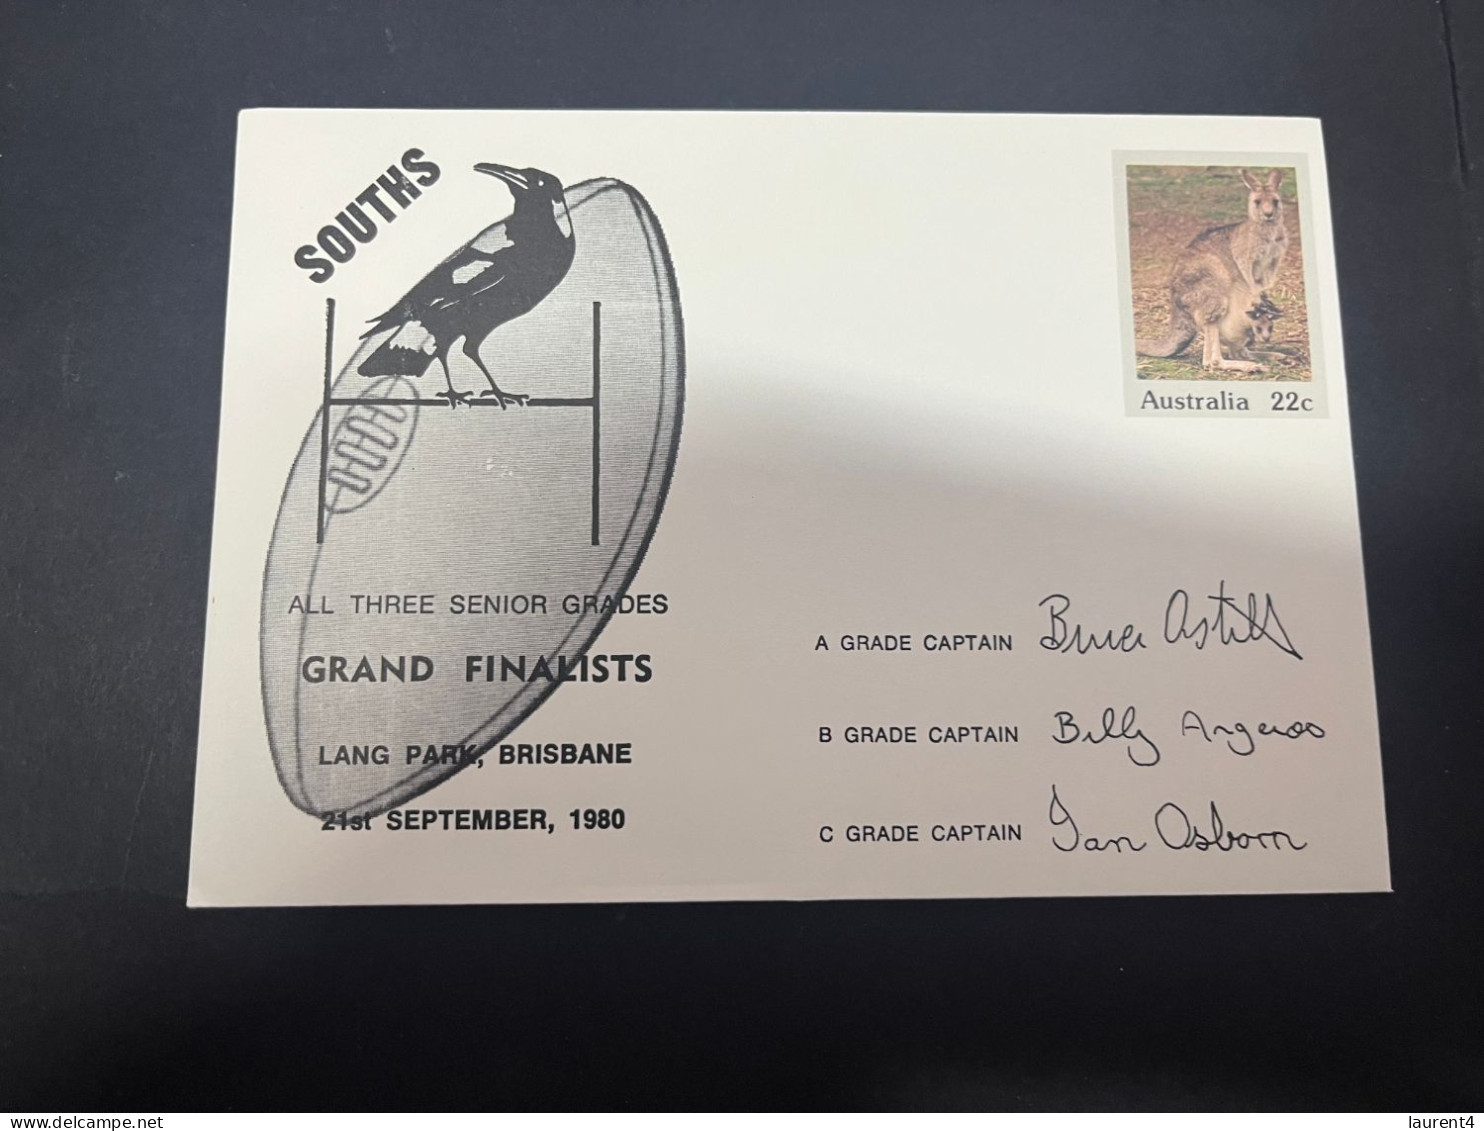 1-5-2023 (3 Z 39) Australia FDC (1 Covers) 1980 - OZ Football - South (magpies) Grand Finalists (signed - Kangaroo) - Sobre Primer Día (FDC)